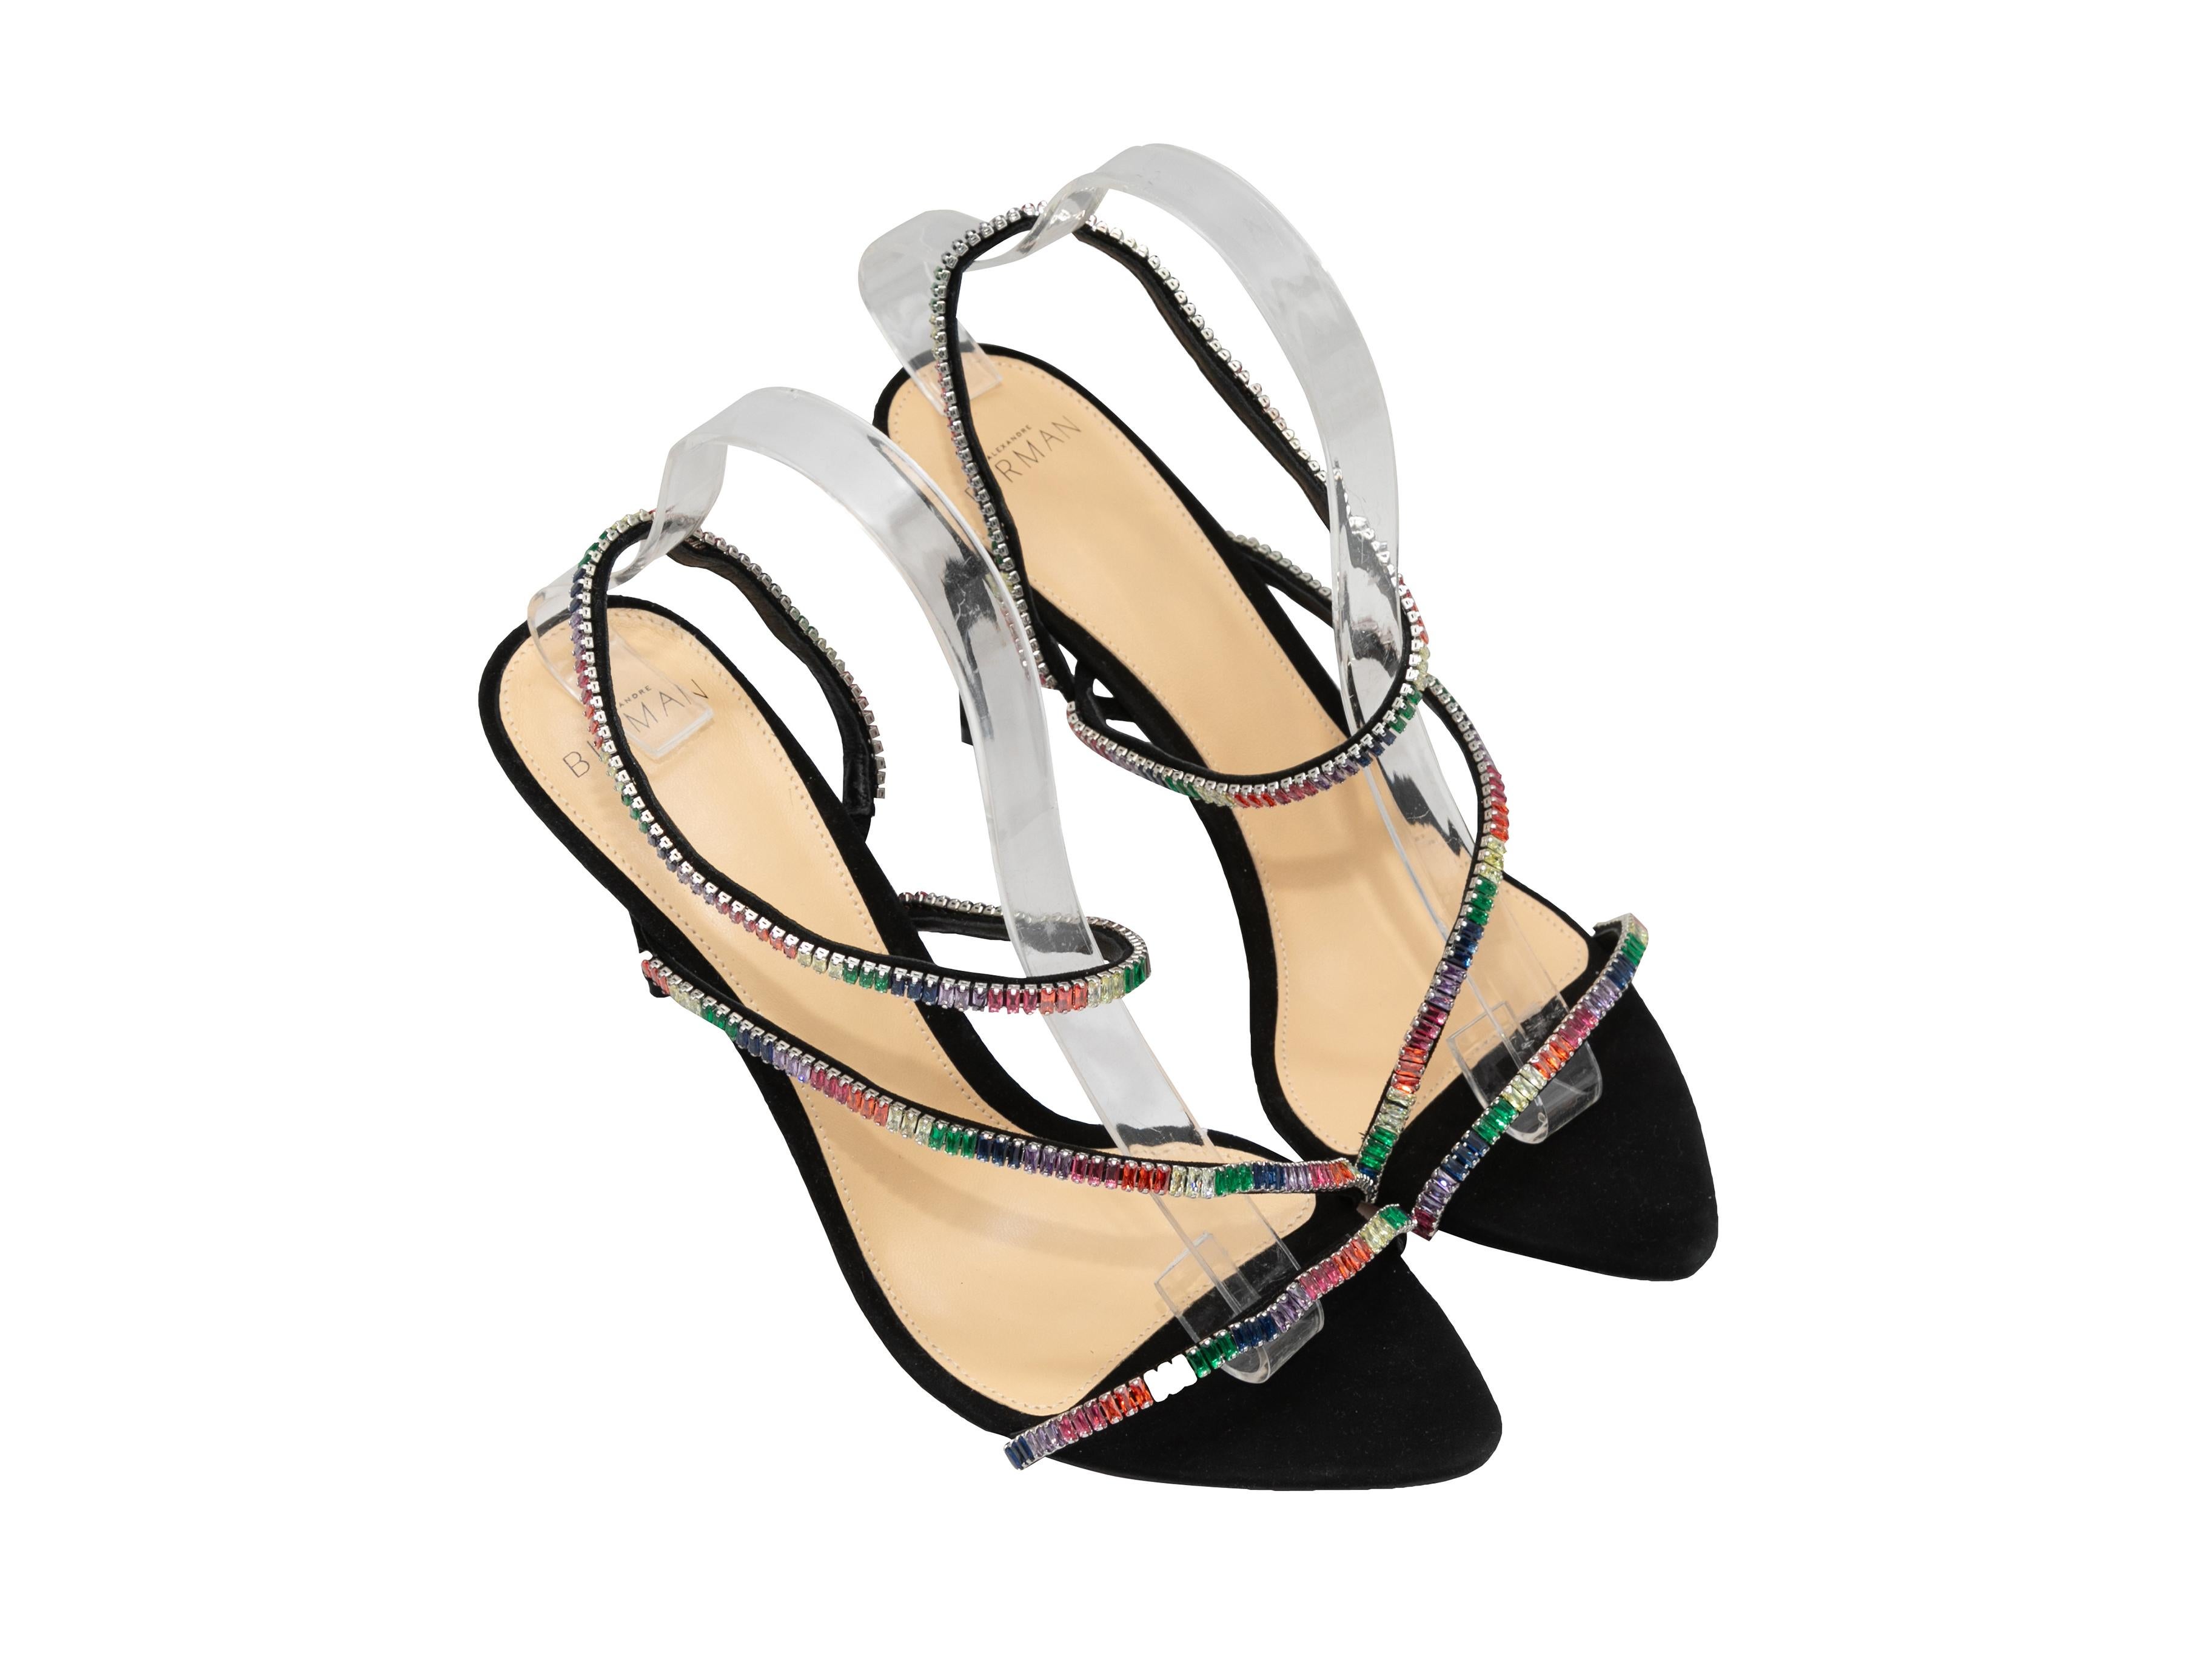 Black and multicolor crystal-embellished strappy heeled sandals by Alexandre Birman. 3.5